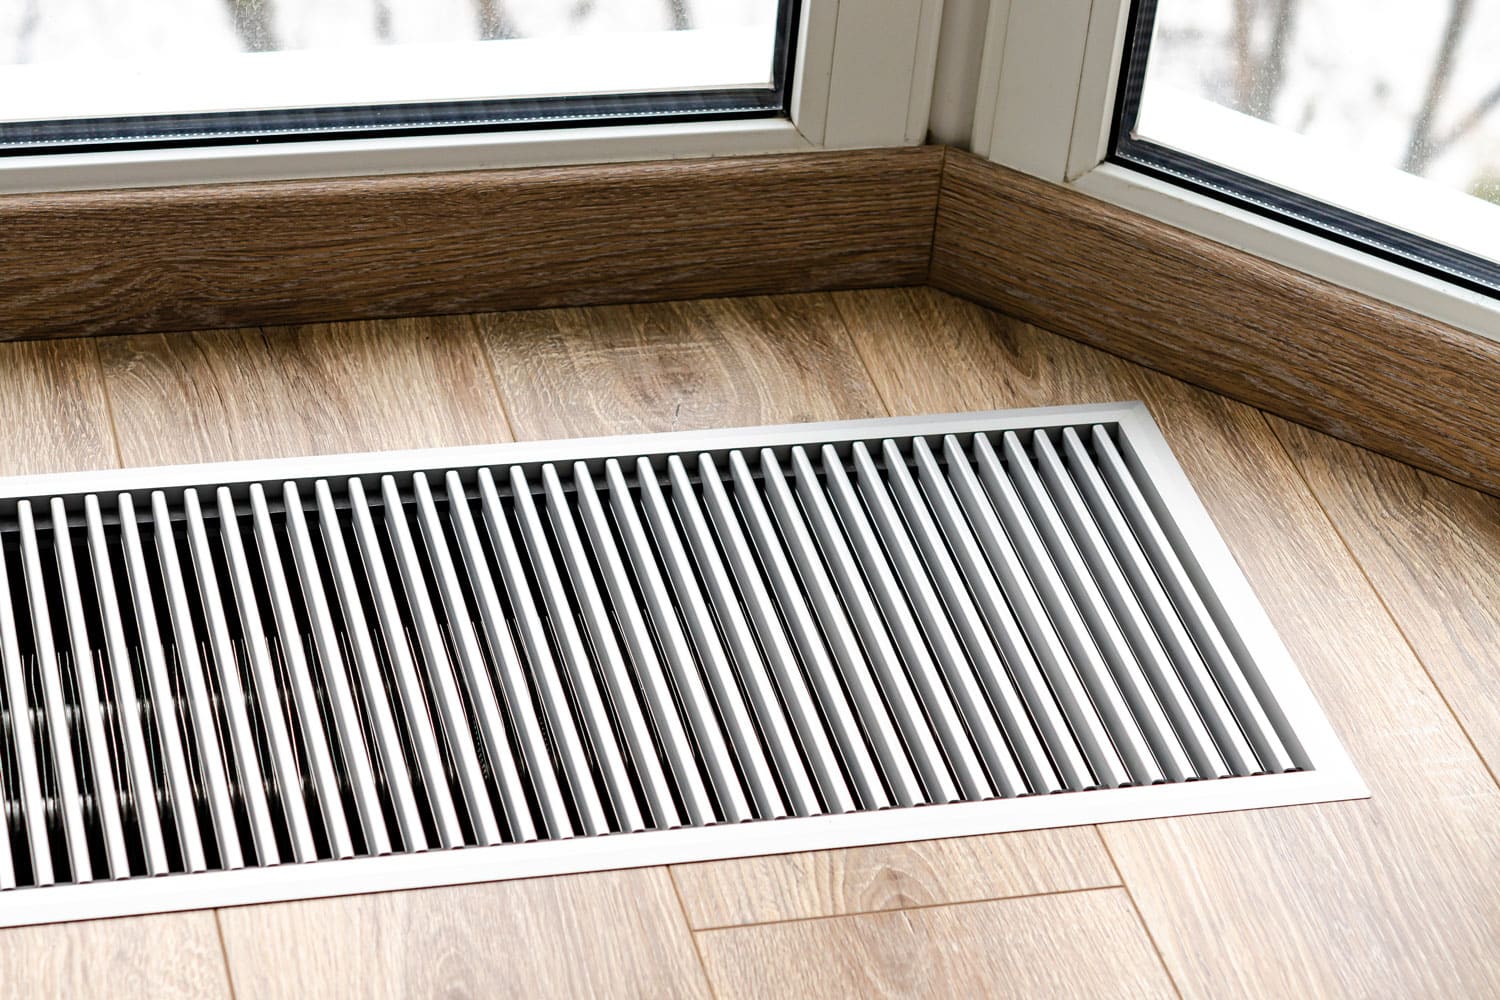 Protective vents on the floor for hvacs